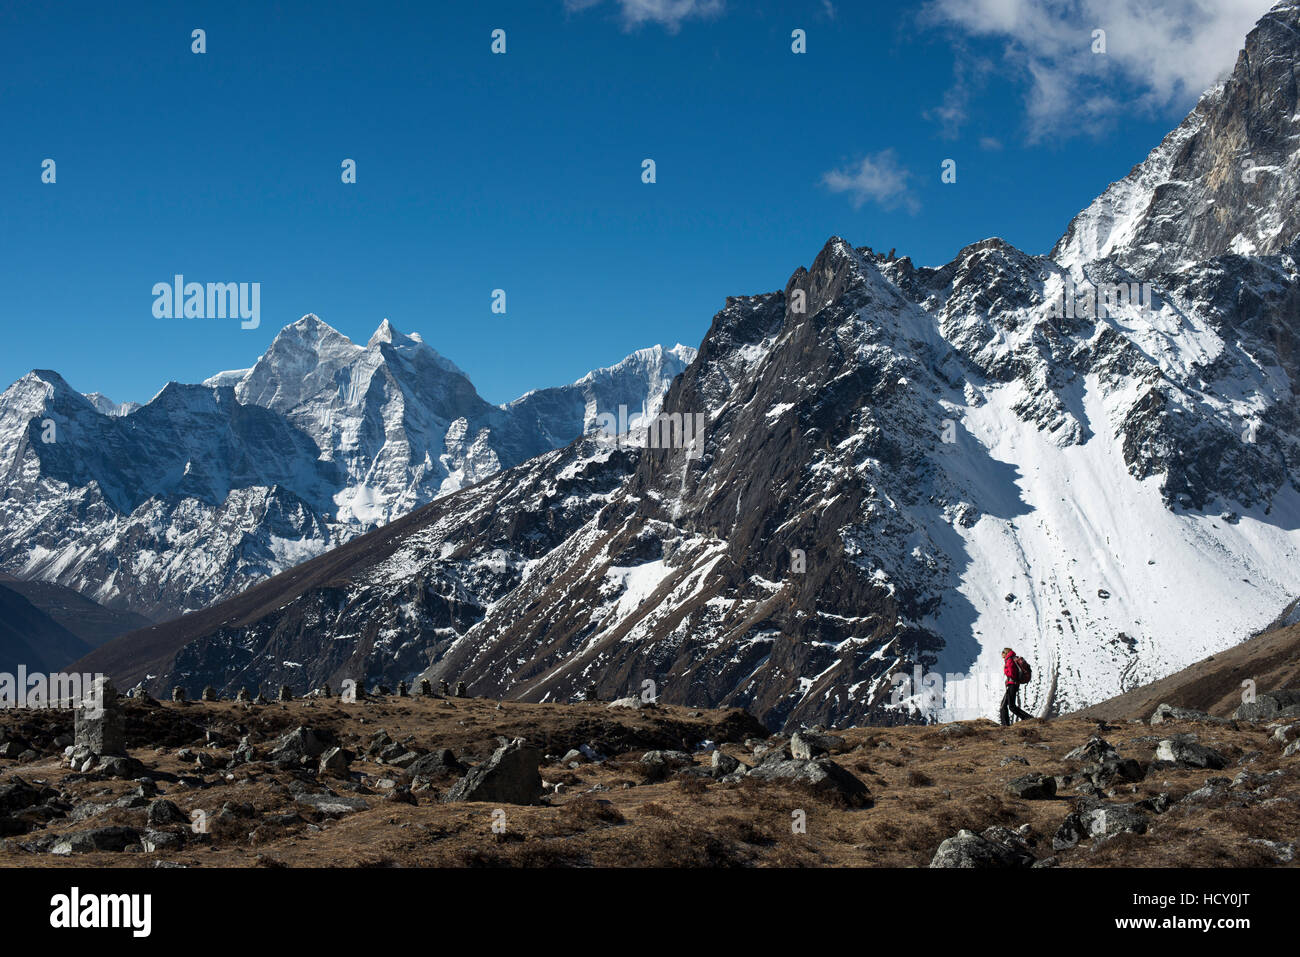 A trekker in the Everest region on the way up to Everest Base Camp seen here walking in front of Cholatse, Khumbu Region, Nepal Stock Photo